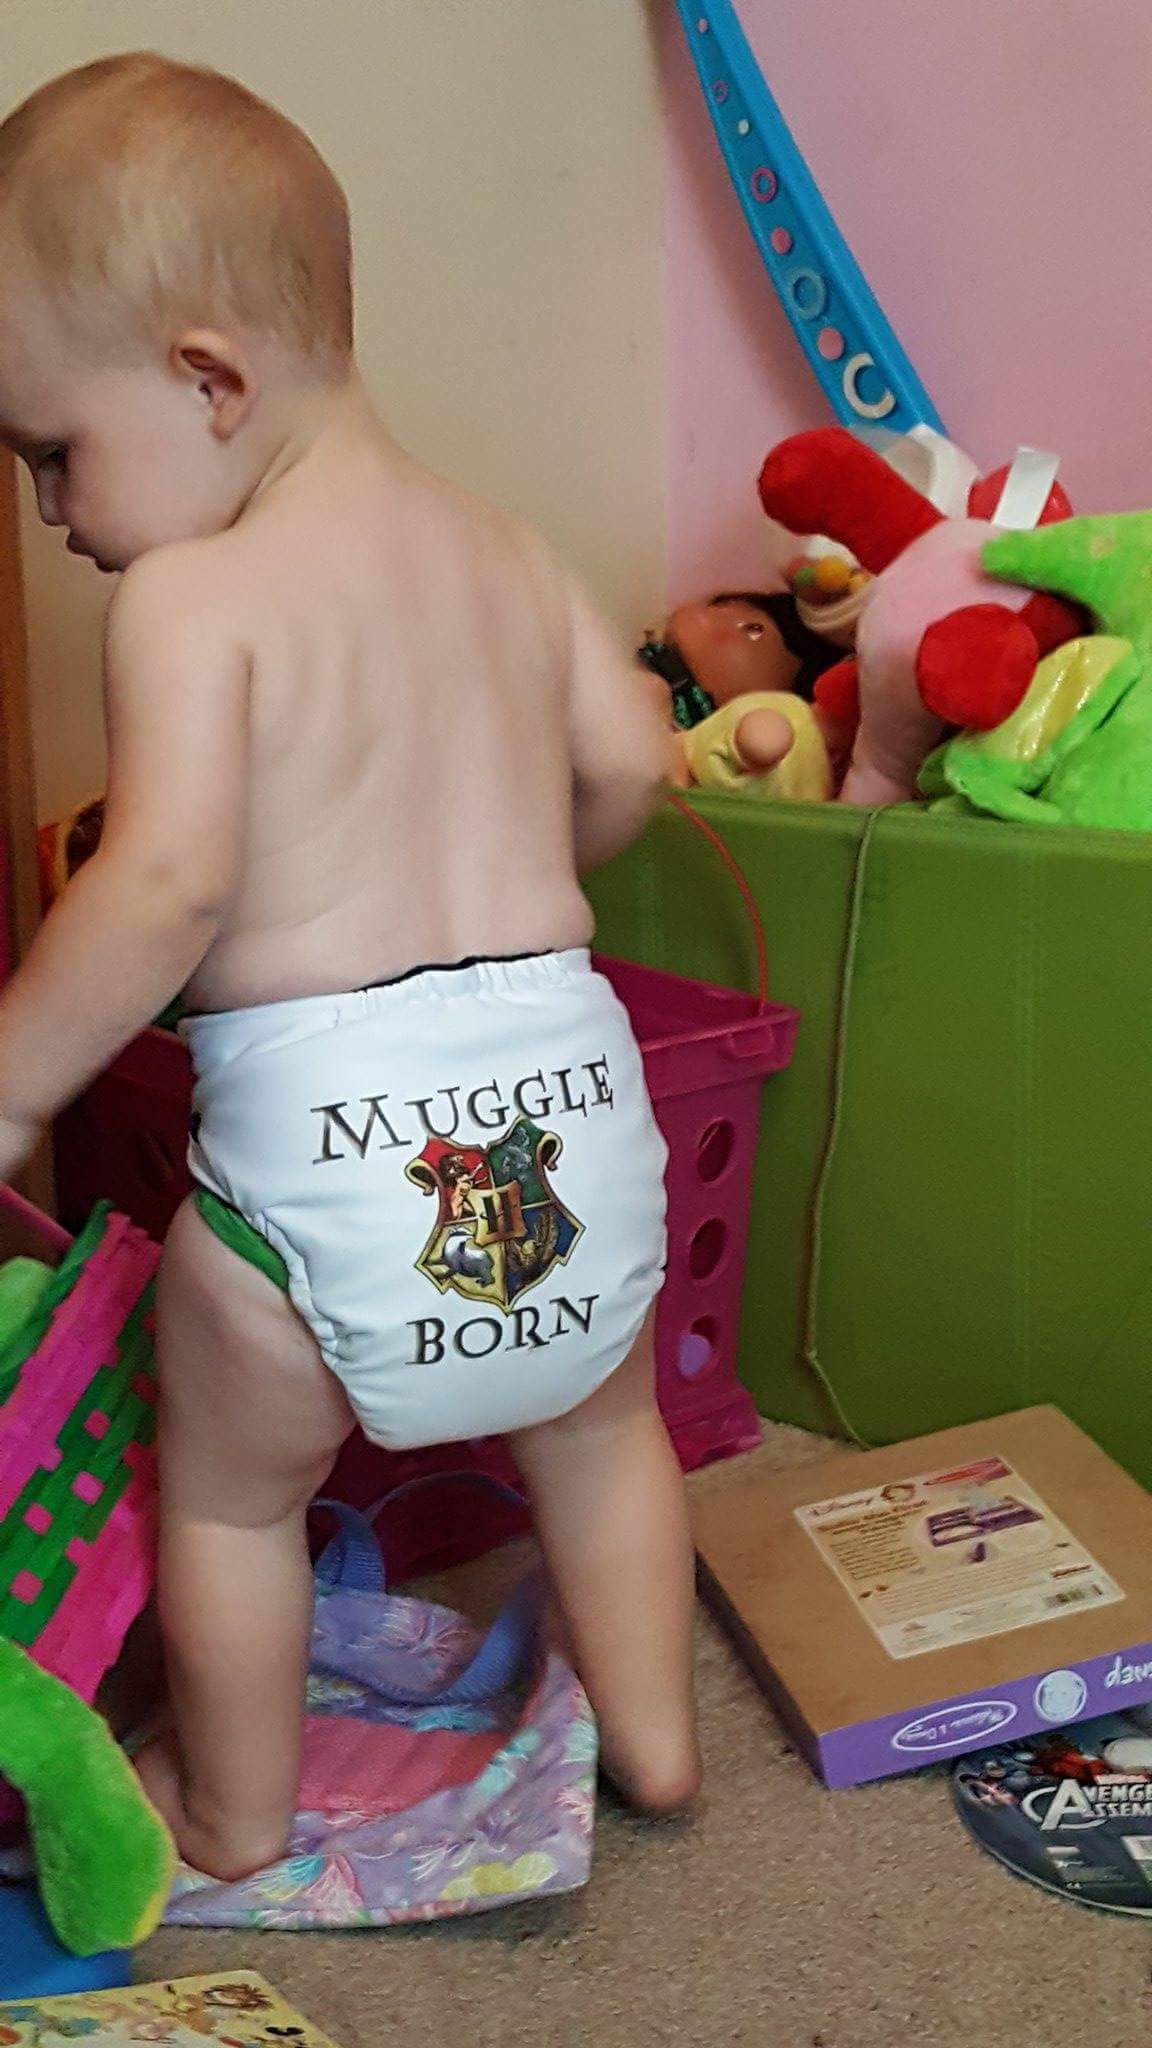 Custom diaper made with sublimation printing